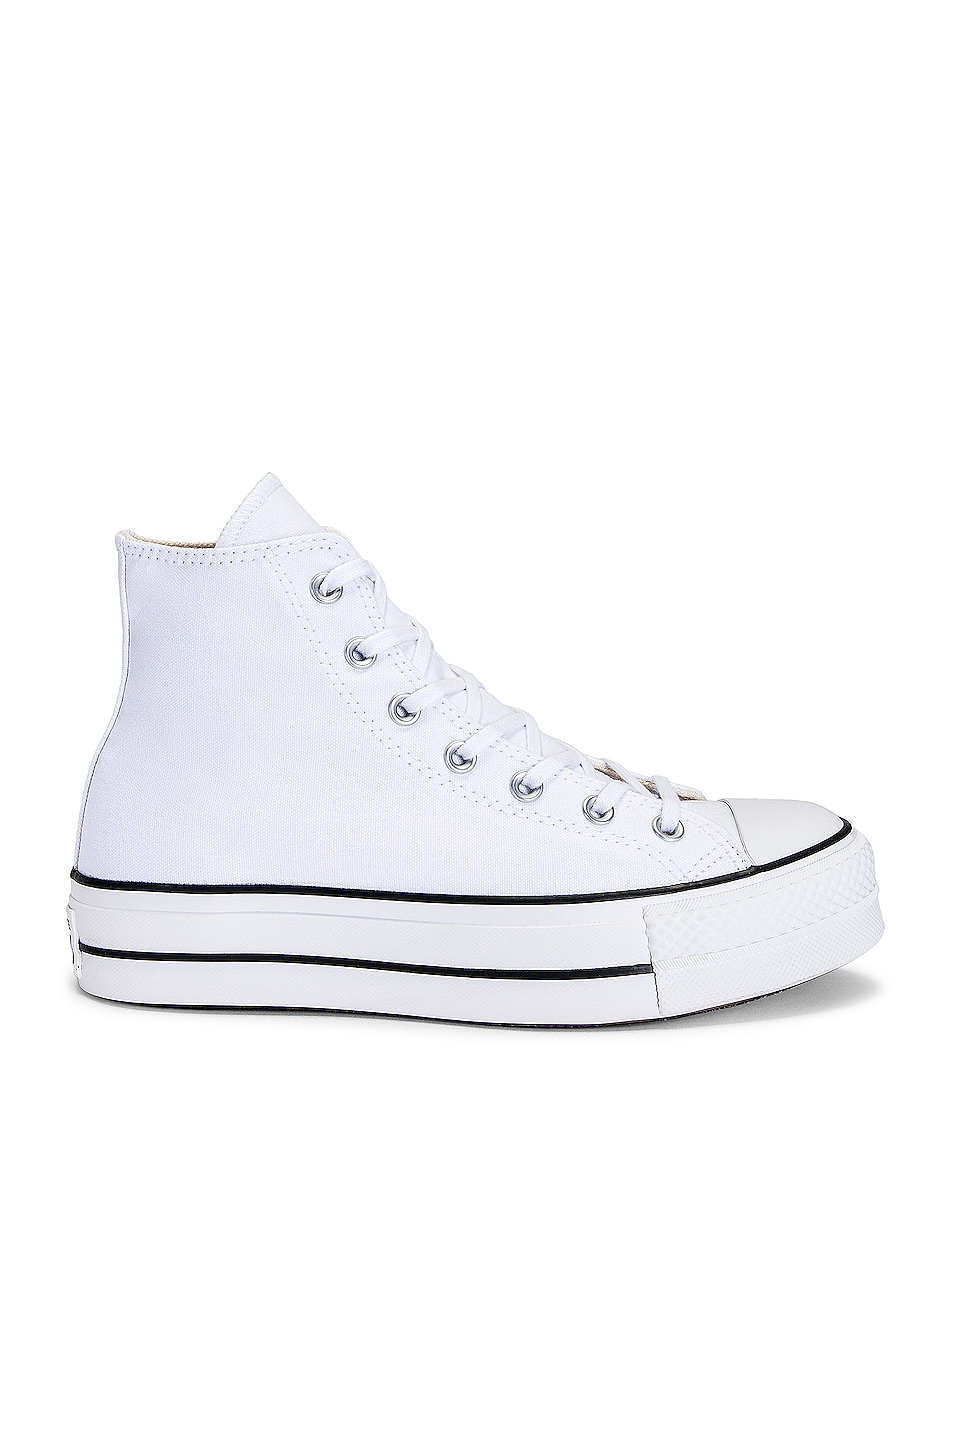 Image 1 of Converse Chuck Taylor All Star Platform Canvas High Tops in White & Black